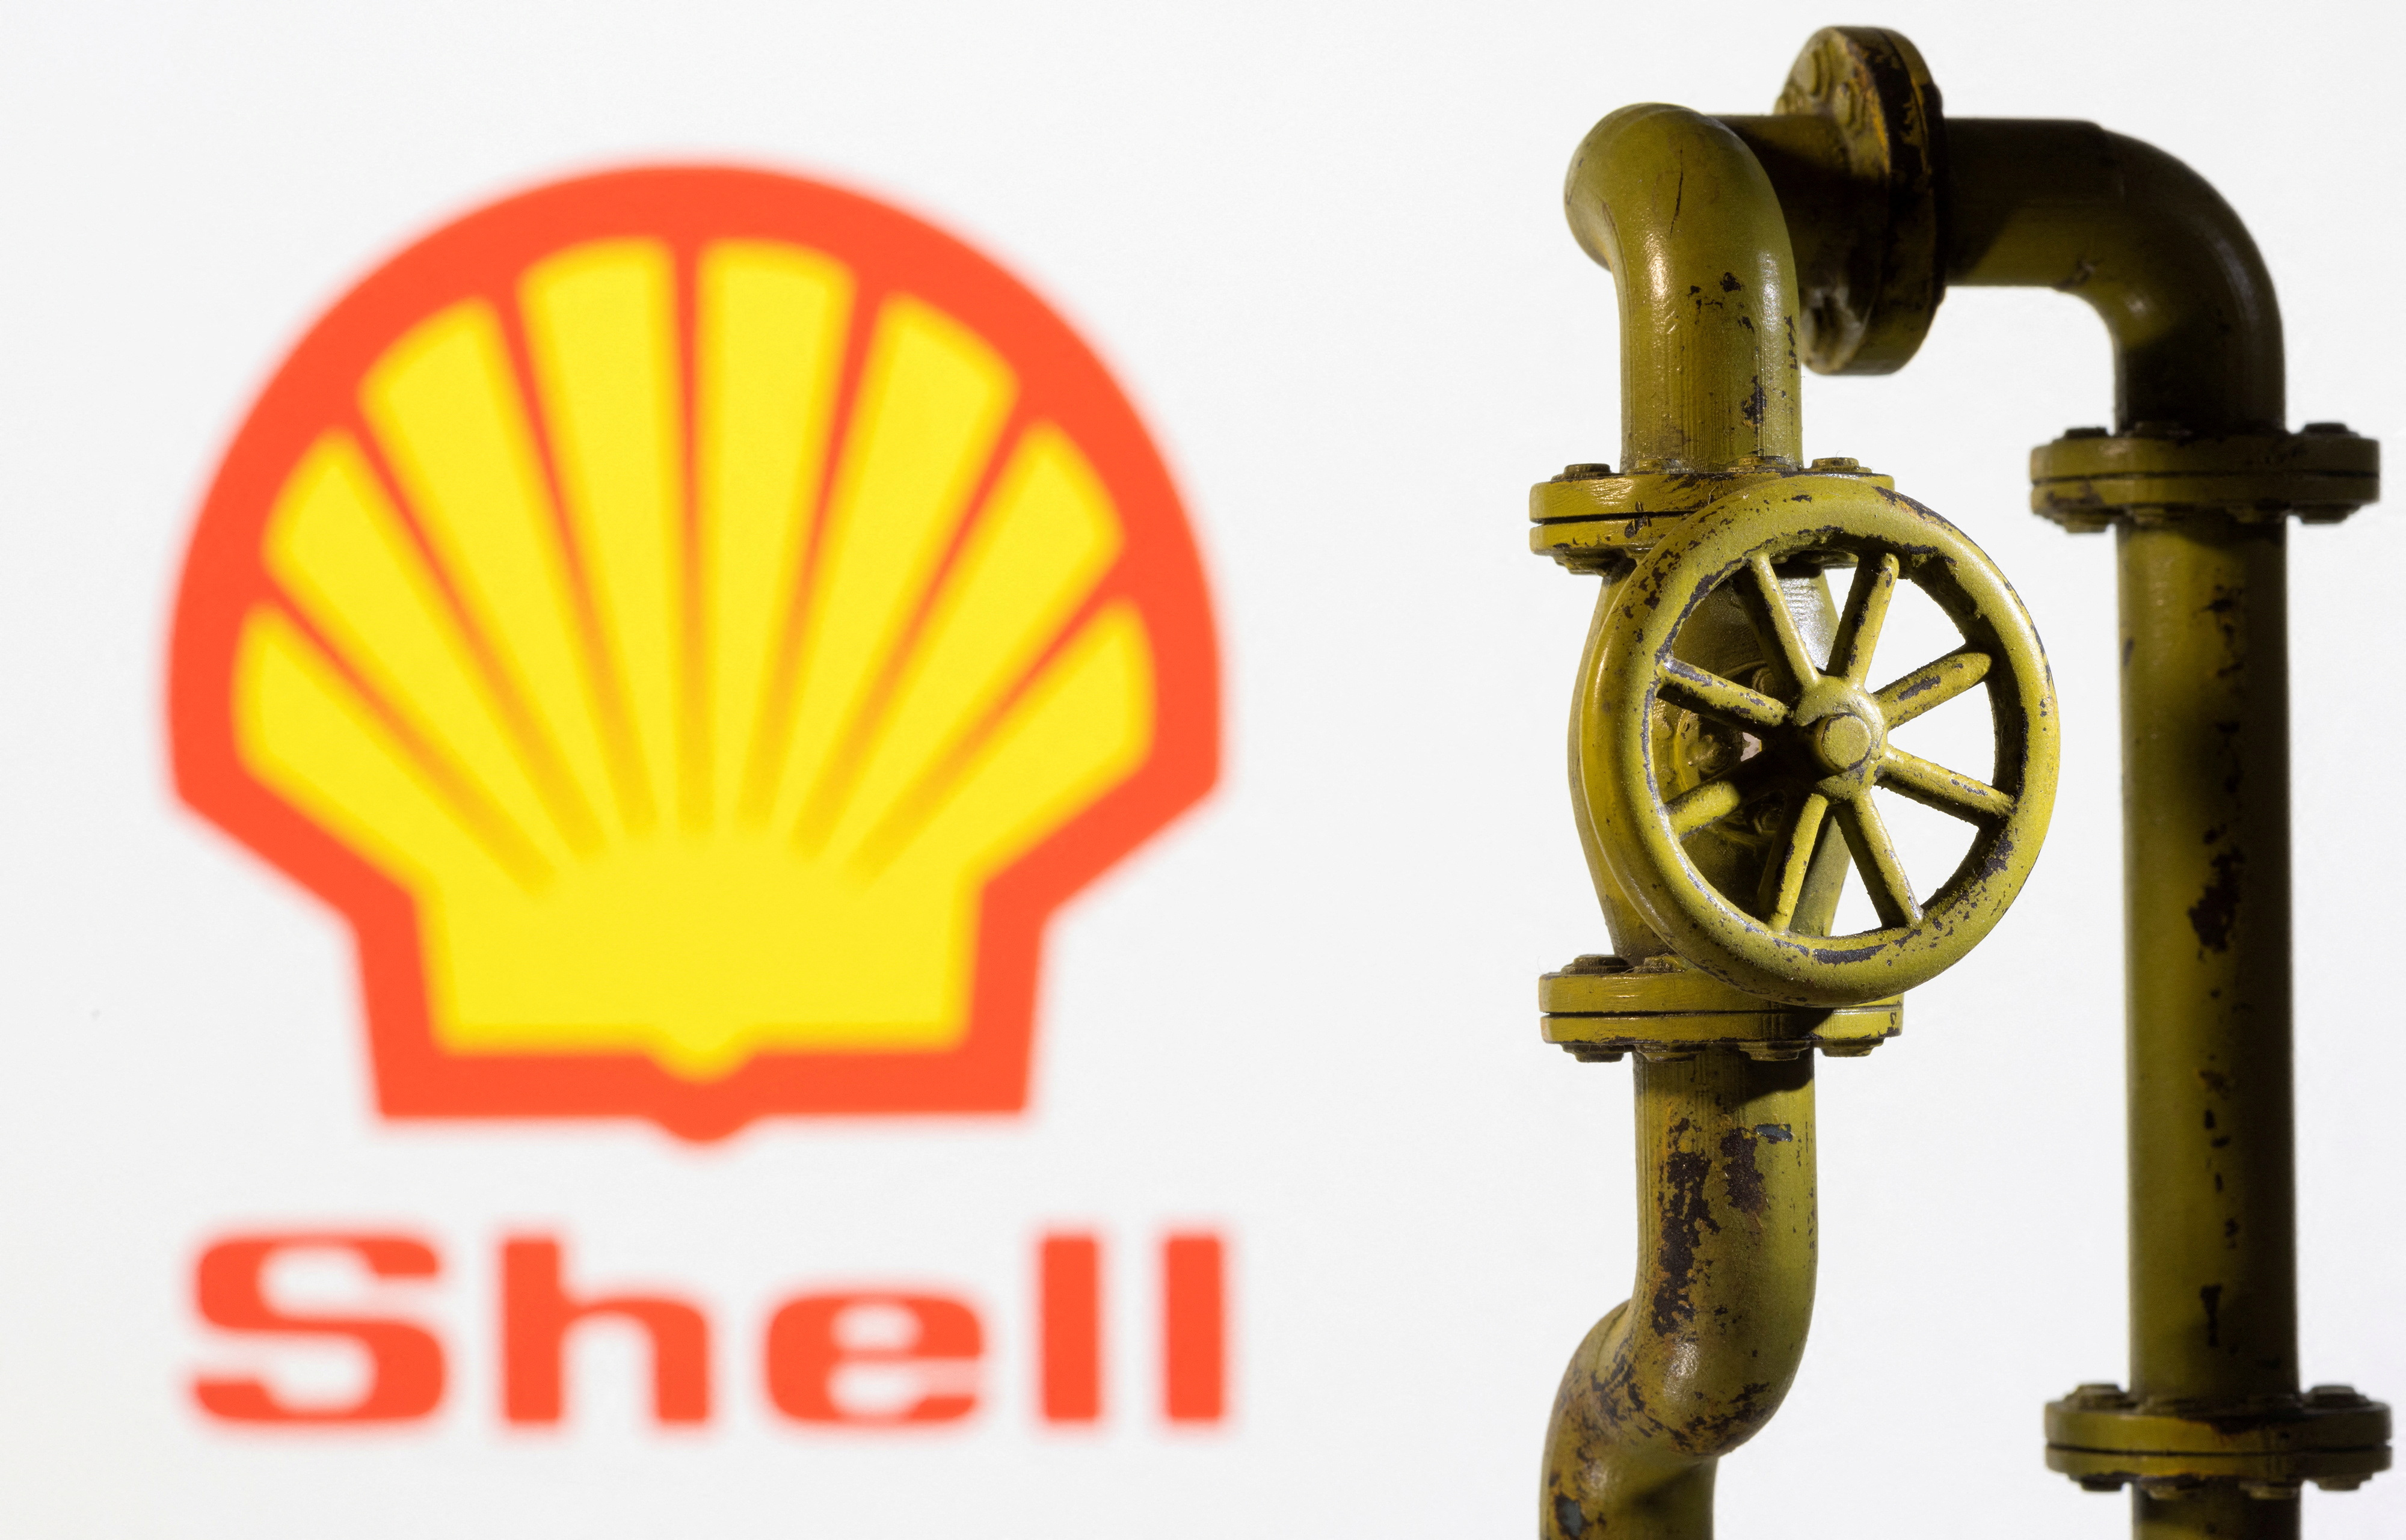 Illustration shows Shell logo and natural gas pipeline